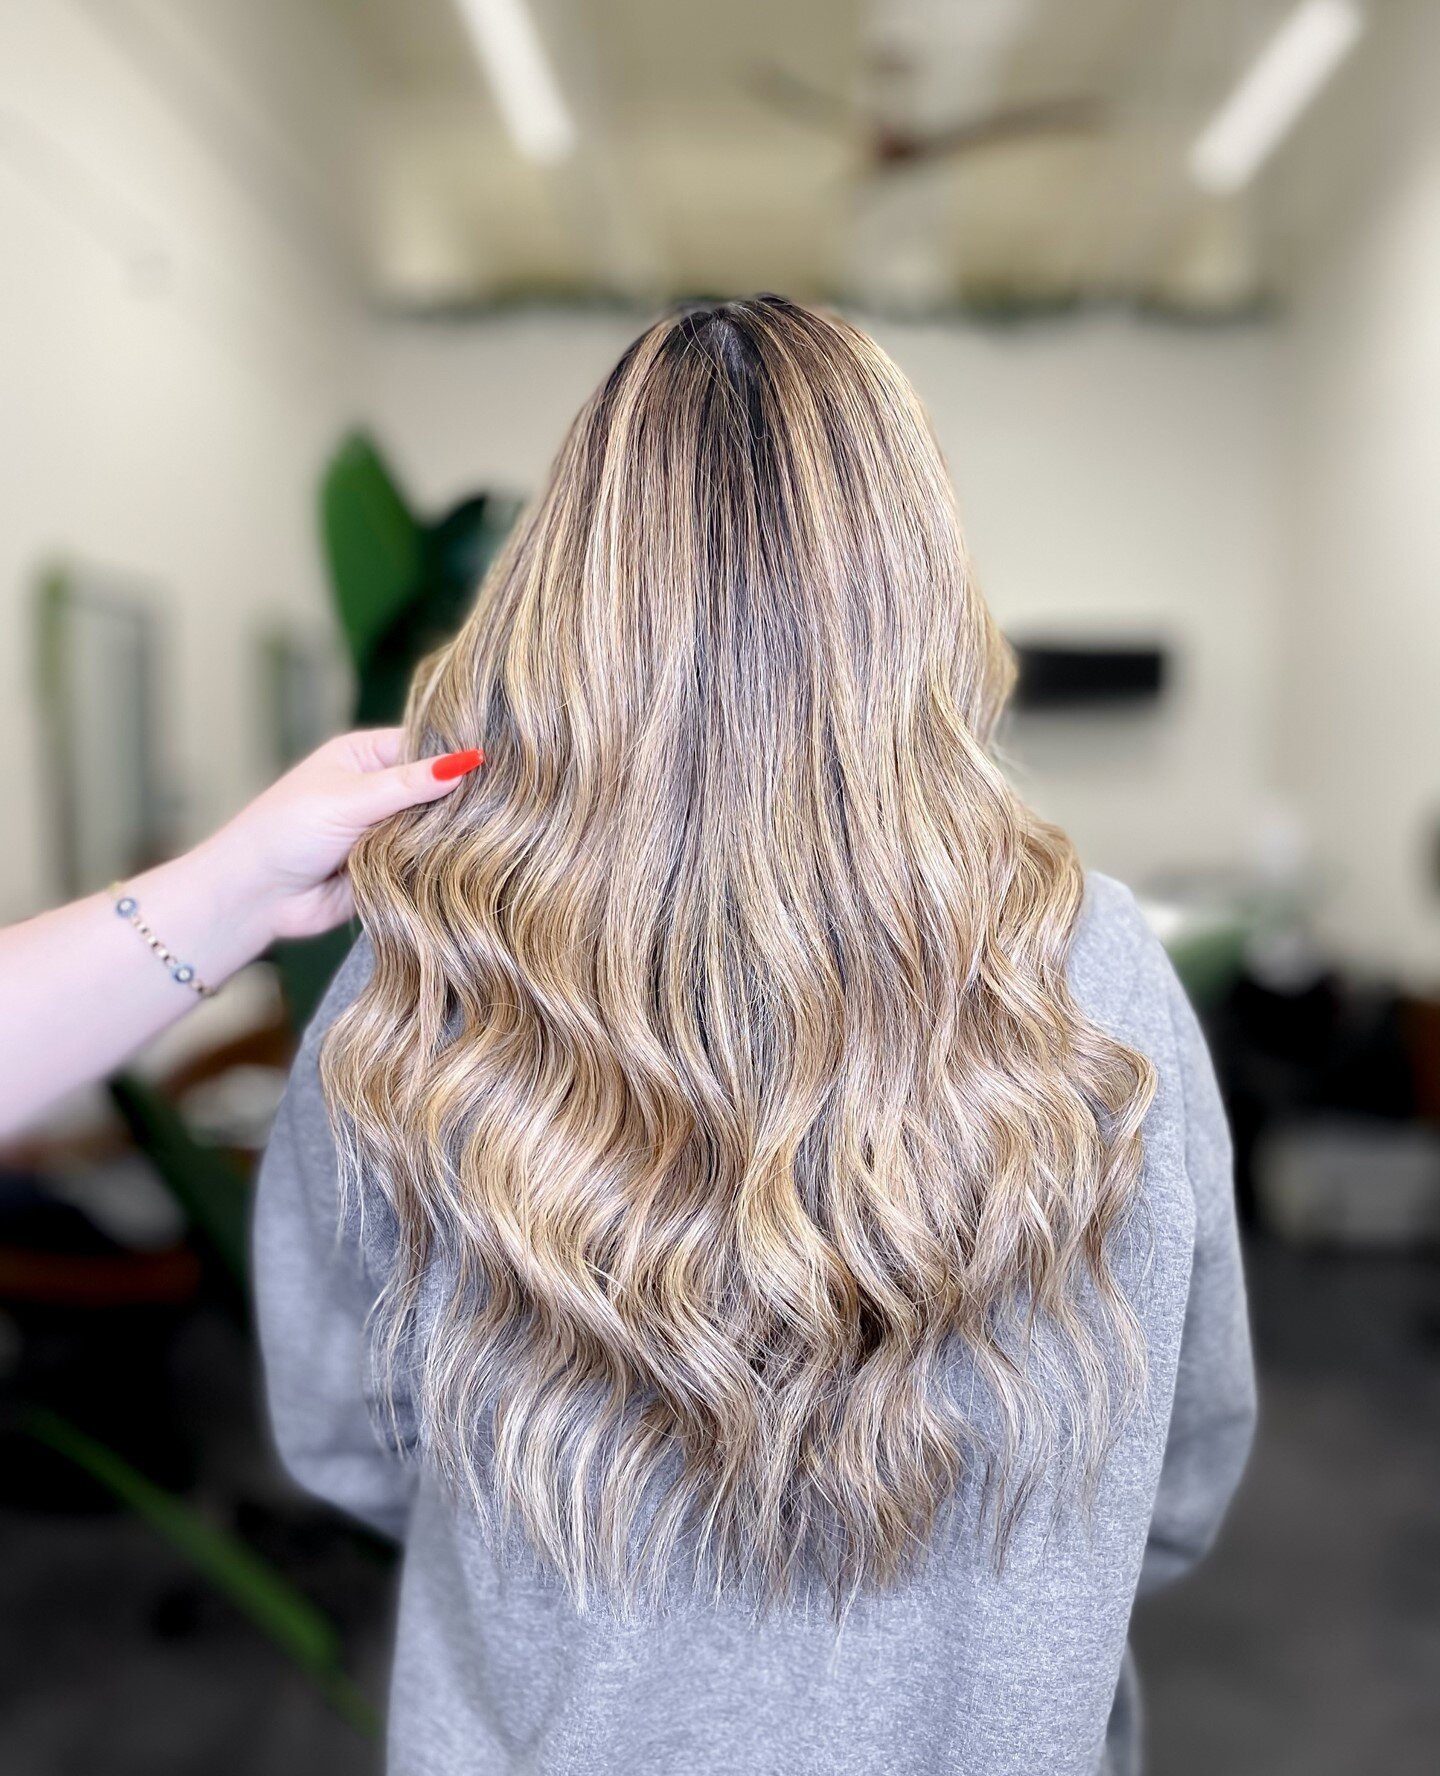 Blunt cut with some long layers @araxjan 
Beachy waves and baddy nails: @arpi_glams 

wave after wave, wave after wave 🌊#glamourax⁠
.⁠
.⁠
.⁠
.⁠
.⁠
#longhair #haircolor #hair #hairstyling #curls #hairgoals #hairstyle #beauty #modernsalon #moderntekni